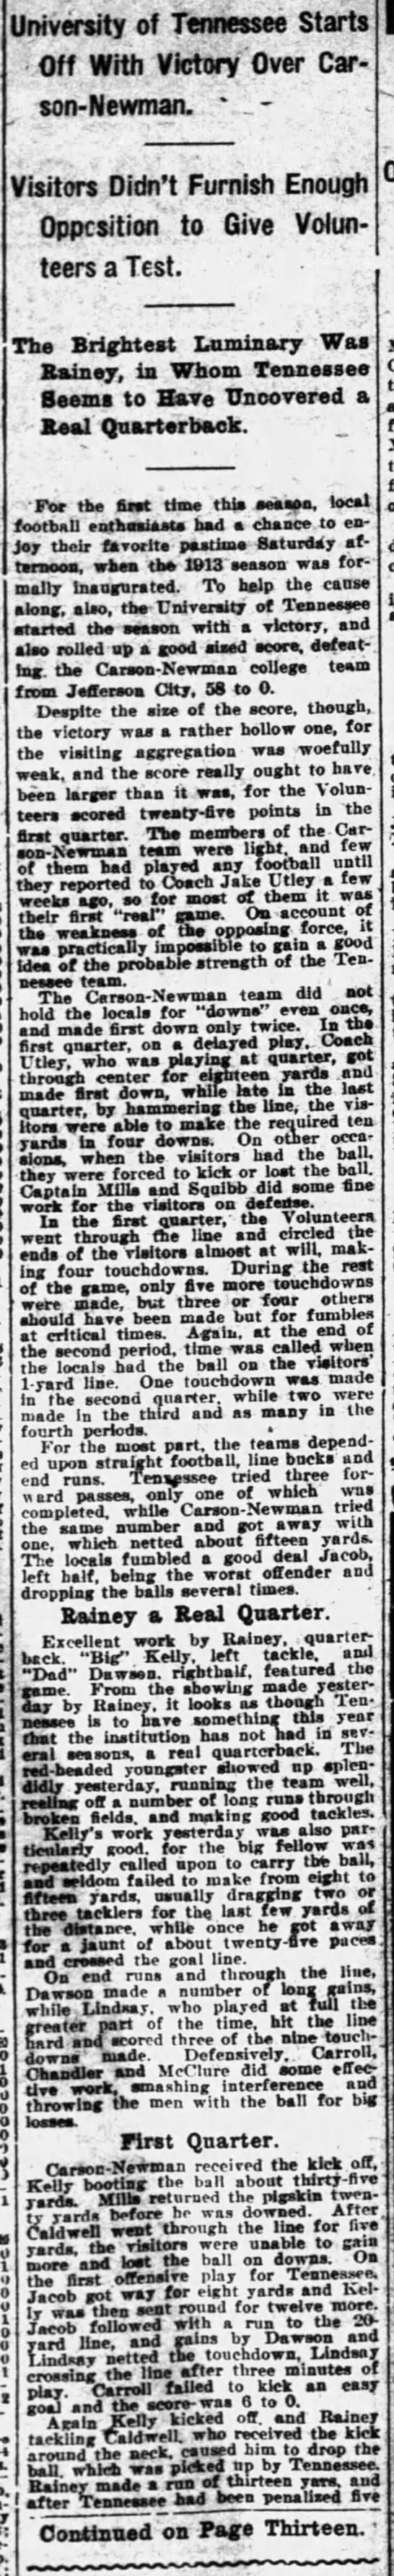 Football season of 1913 is formally ushered in - 